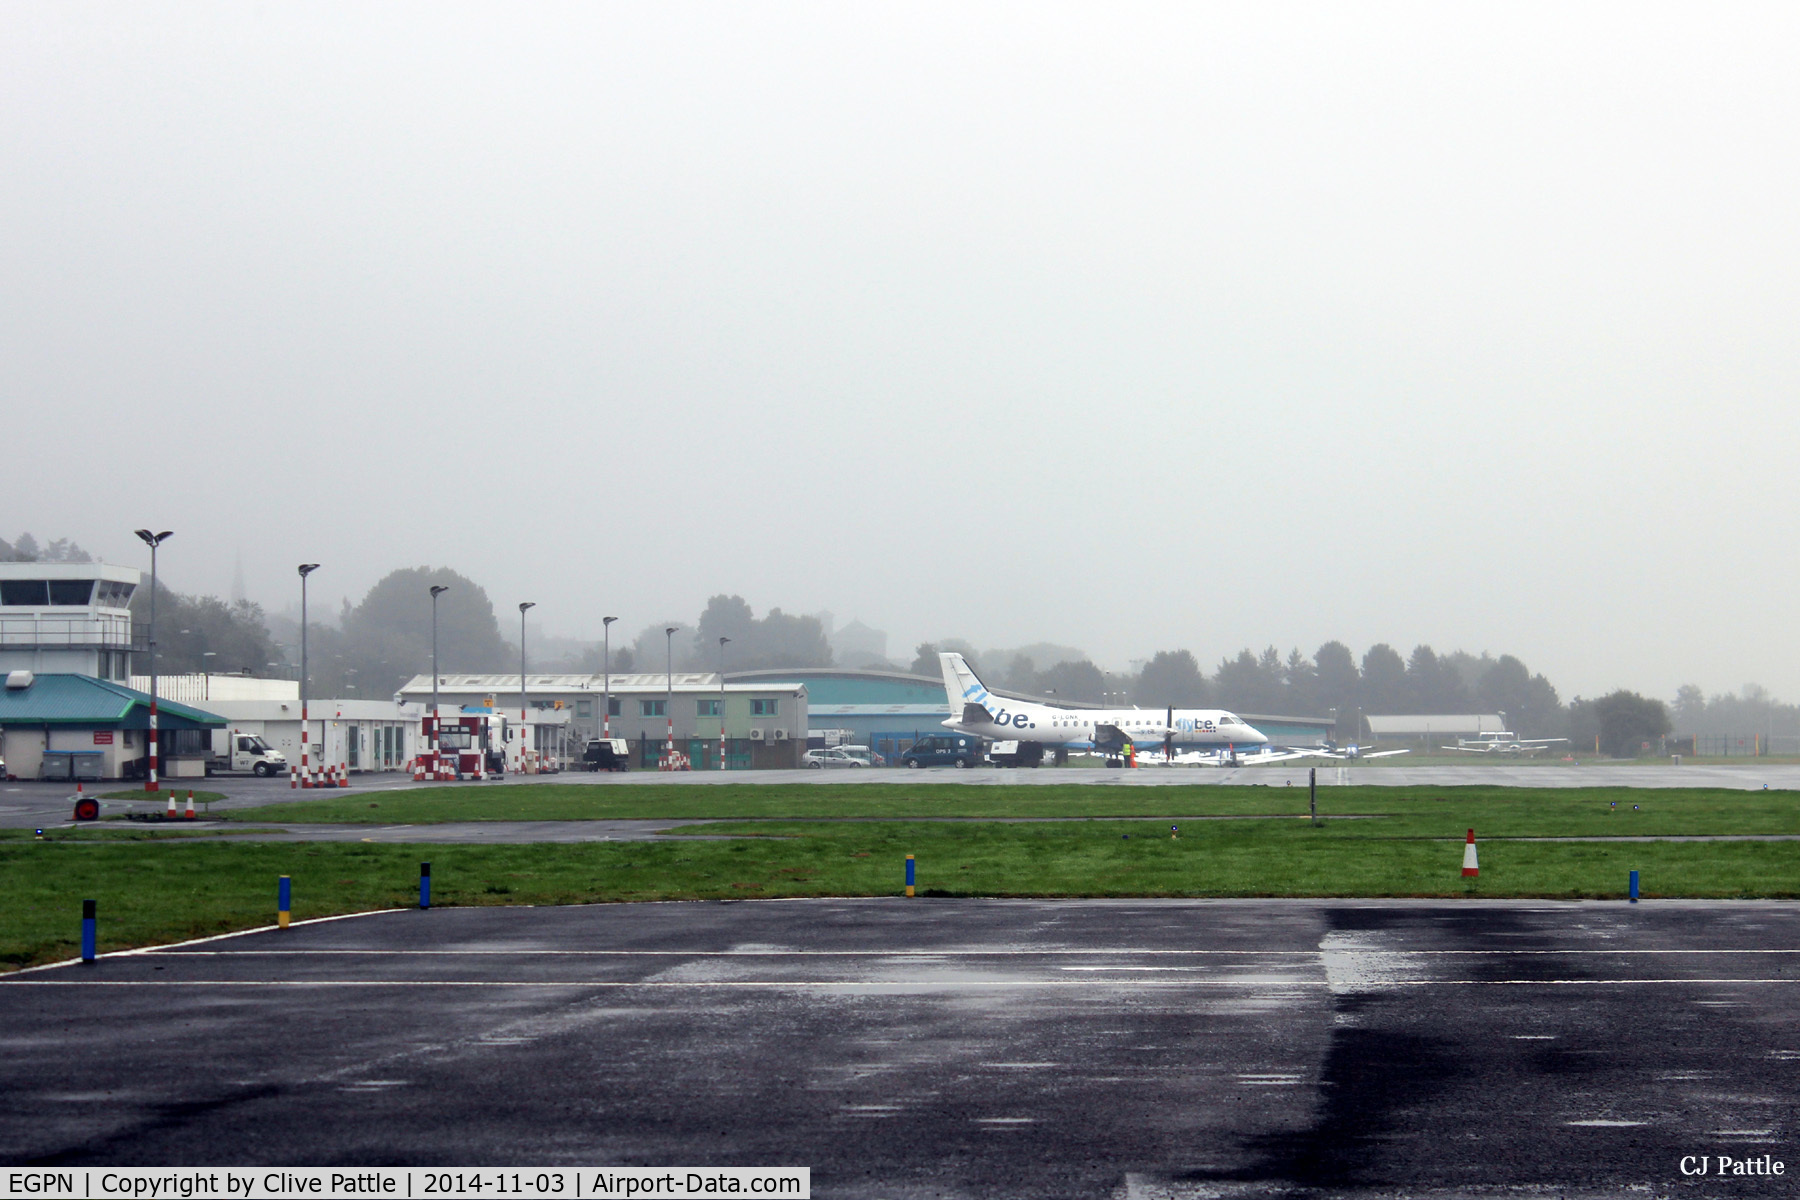 Dundee Airport, Dundee, Scotland United Kingdom (EGPN) - A fog bound Dundee Riverside with a diverted Flybe SF340B G-LGNK seeking refuge